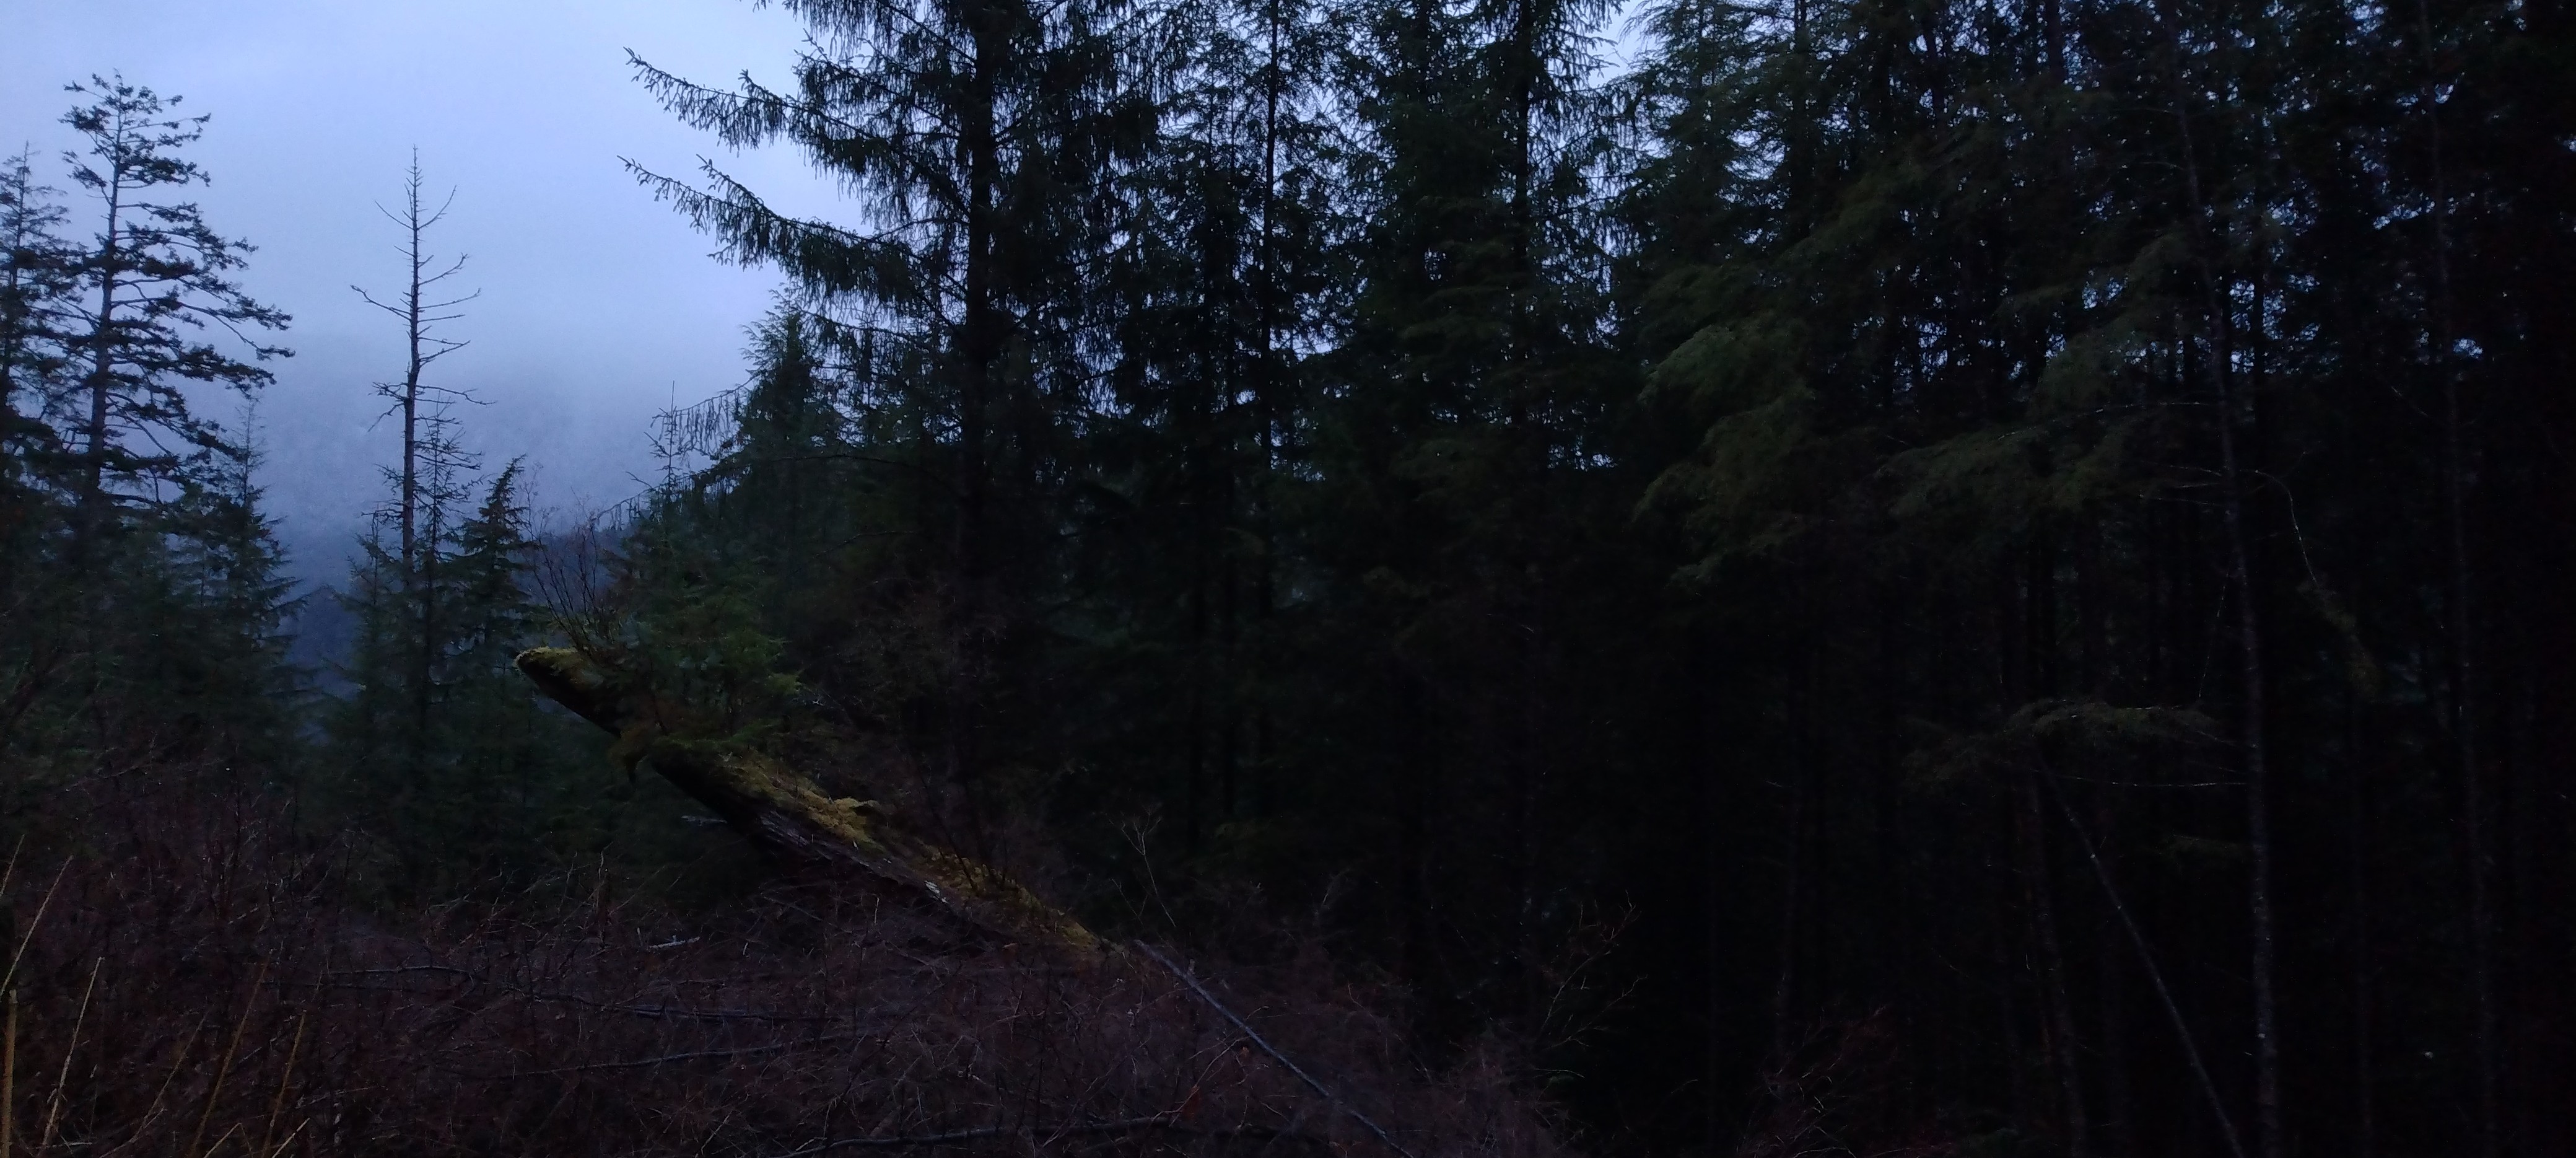 Trees in a forest, one snag (dead tree) sticking up noticeably. All shrouded in mist.